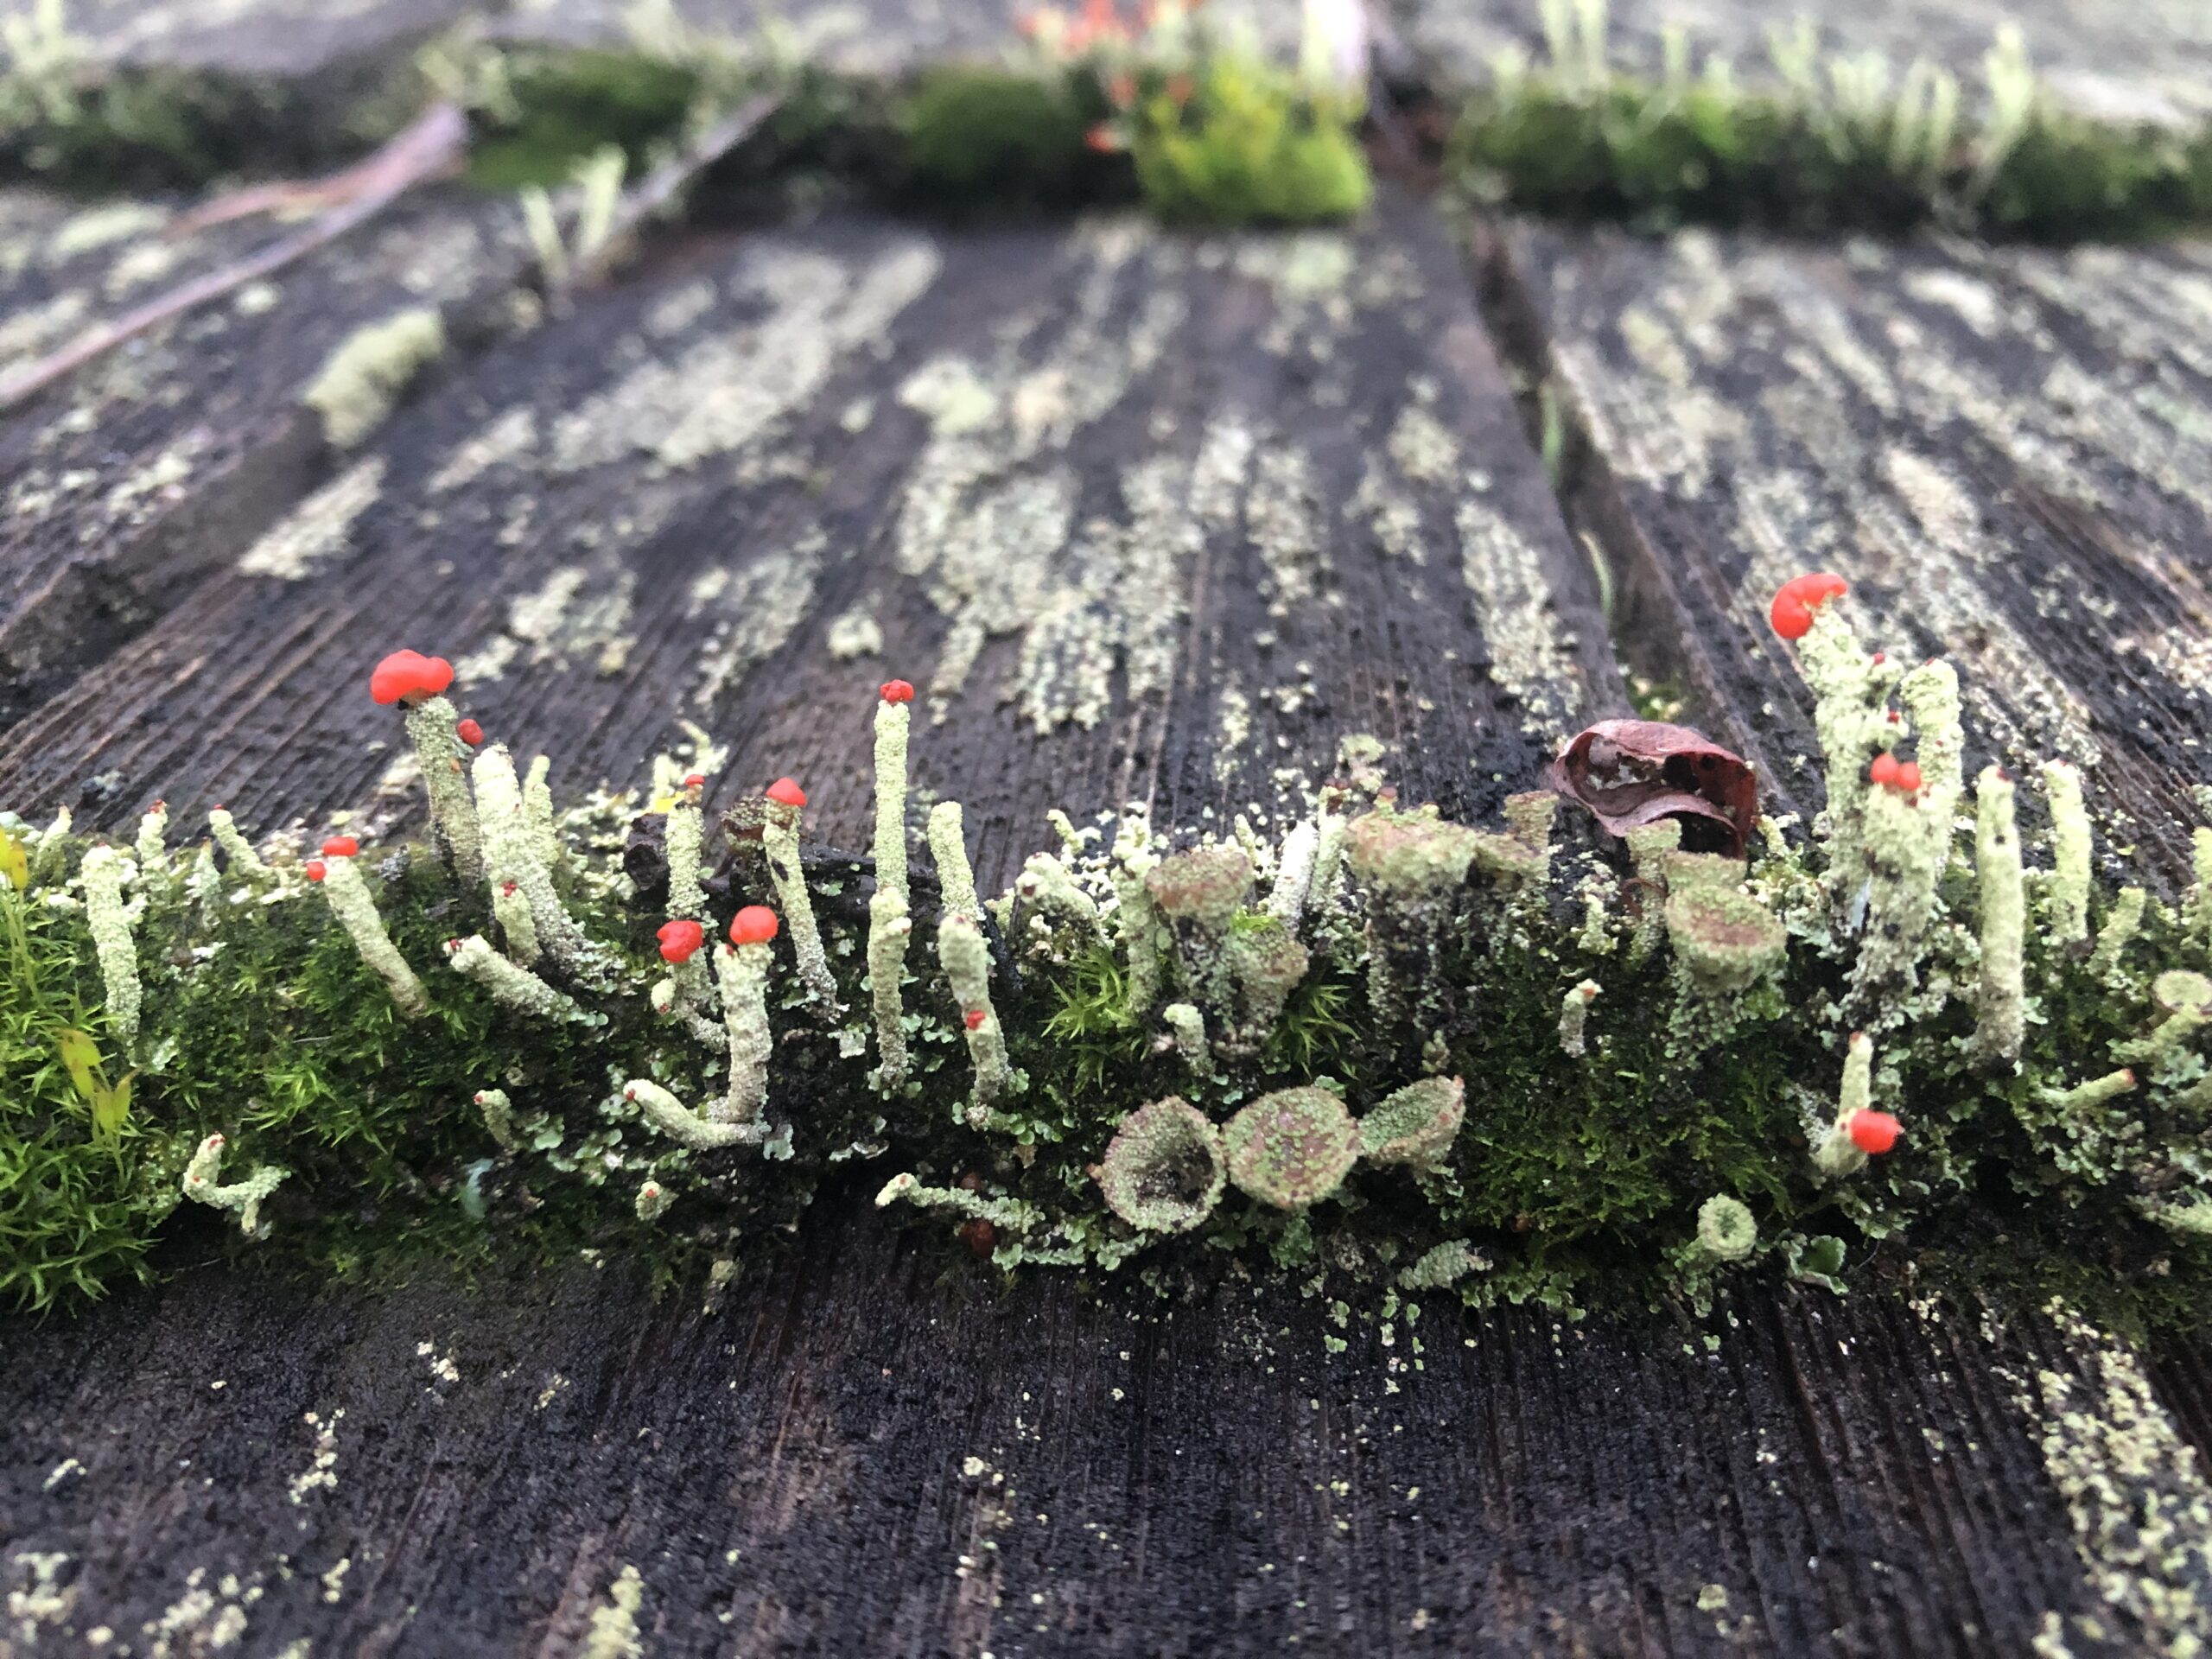 This image contains a dead plank of wood that has different moss on it and lichens, two of which are Pixie Cups and Lipstick Cladonia. Lipstick Cladonia looks similar to a matchstick, with a long slender green "stick" and red tip. Pixie Cups look like a fuzzy green funnel or a chalice that a pixie might drink out of.